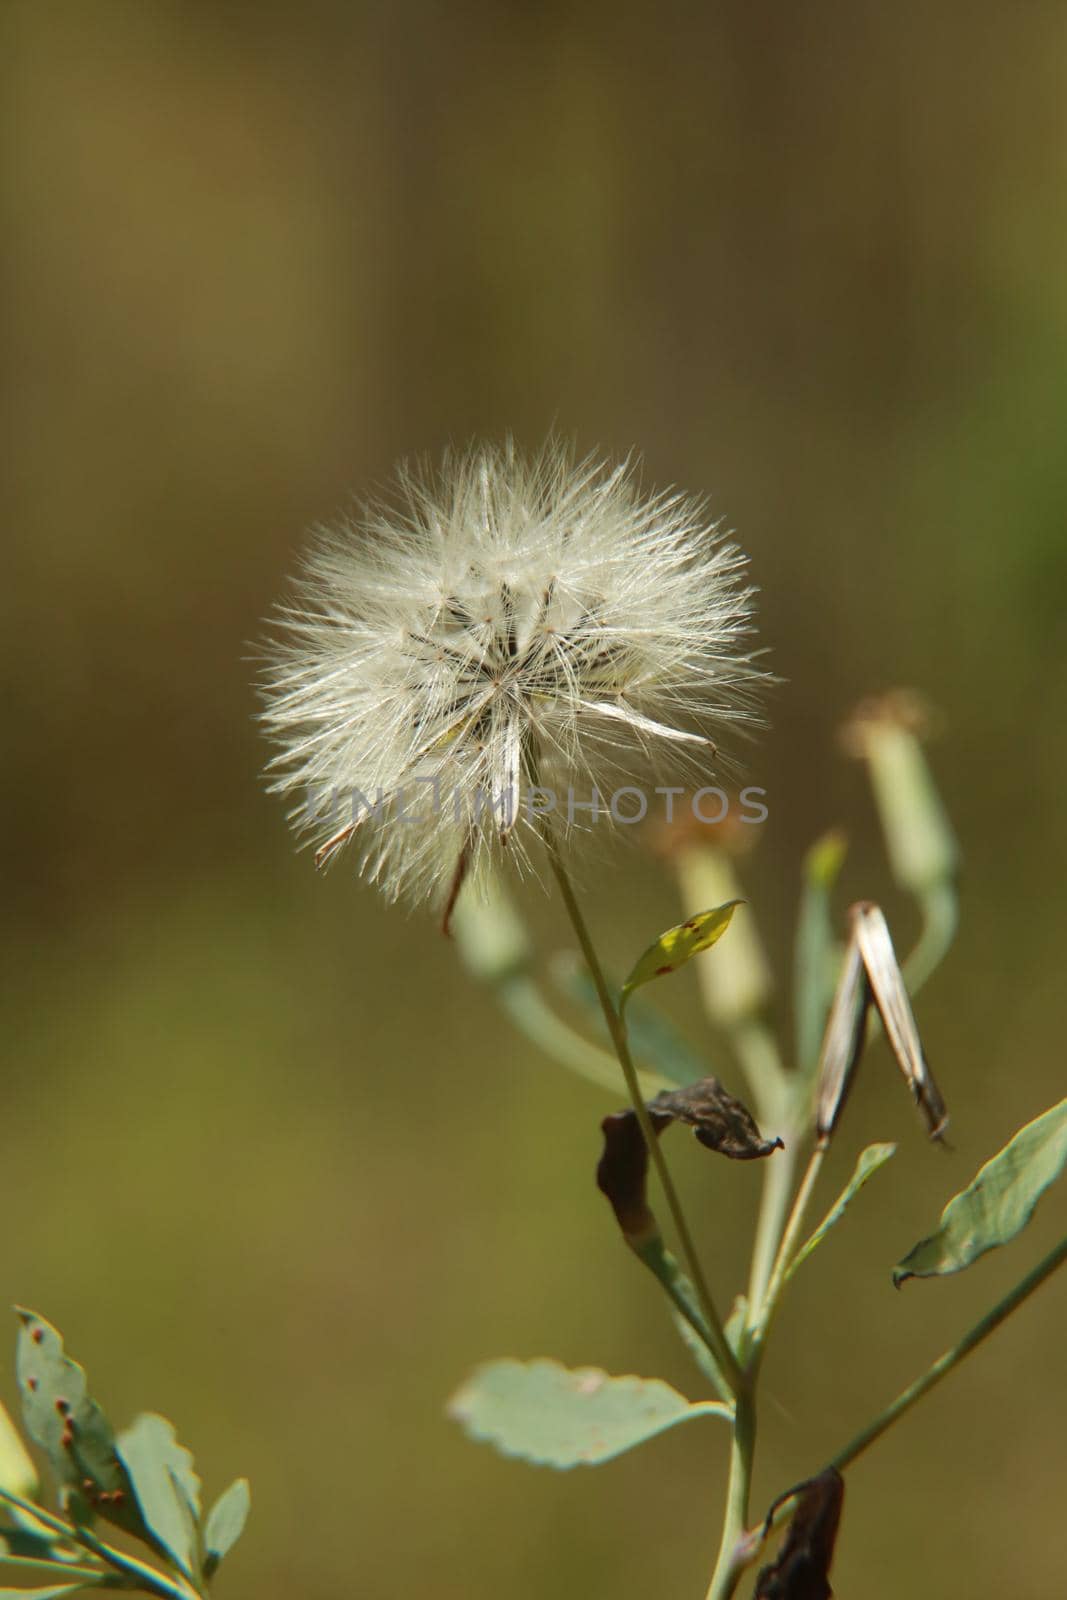 conde, bahia, brazil - october 8, 2021: dandelion flower - taraxacum officinale - is seen in a rural area in the town of Count.